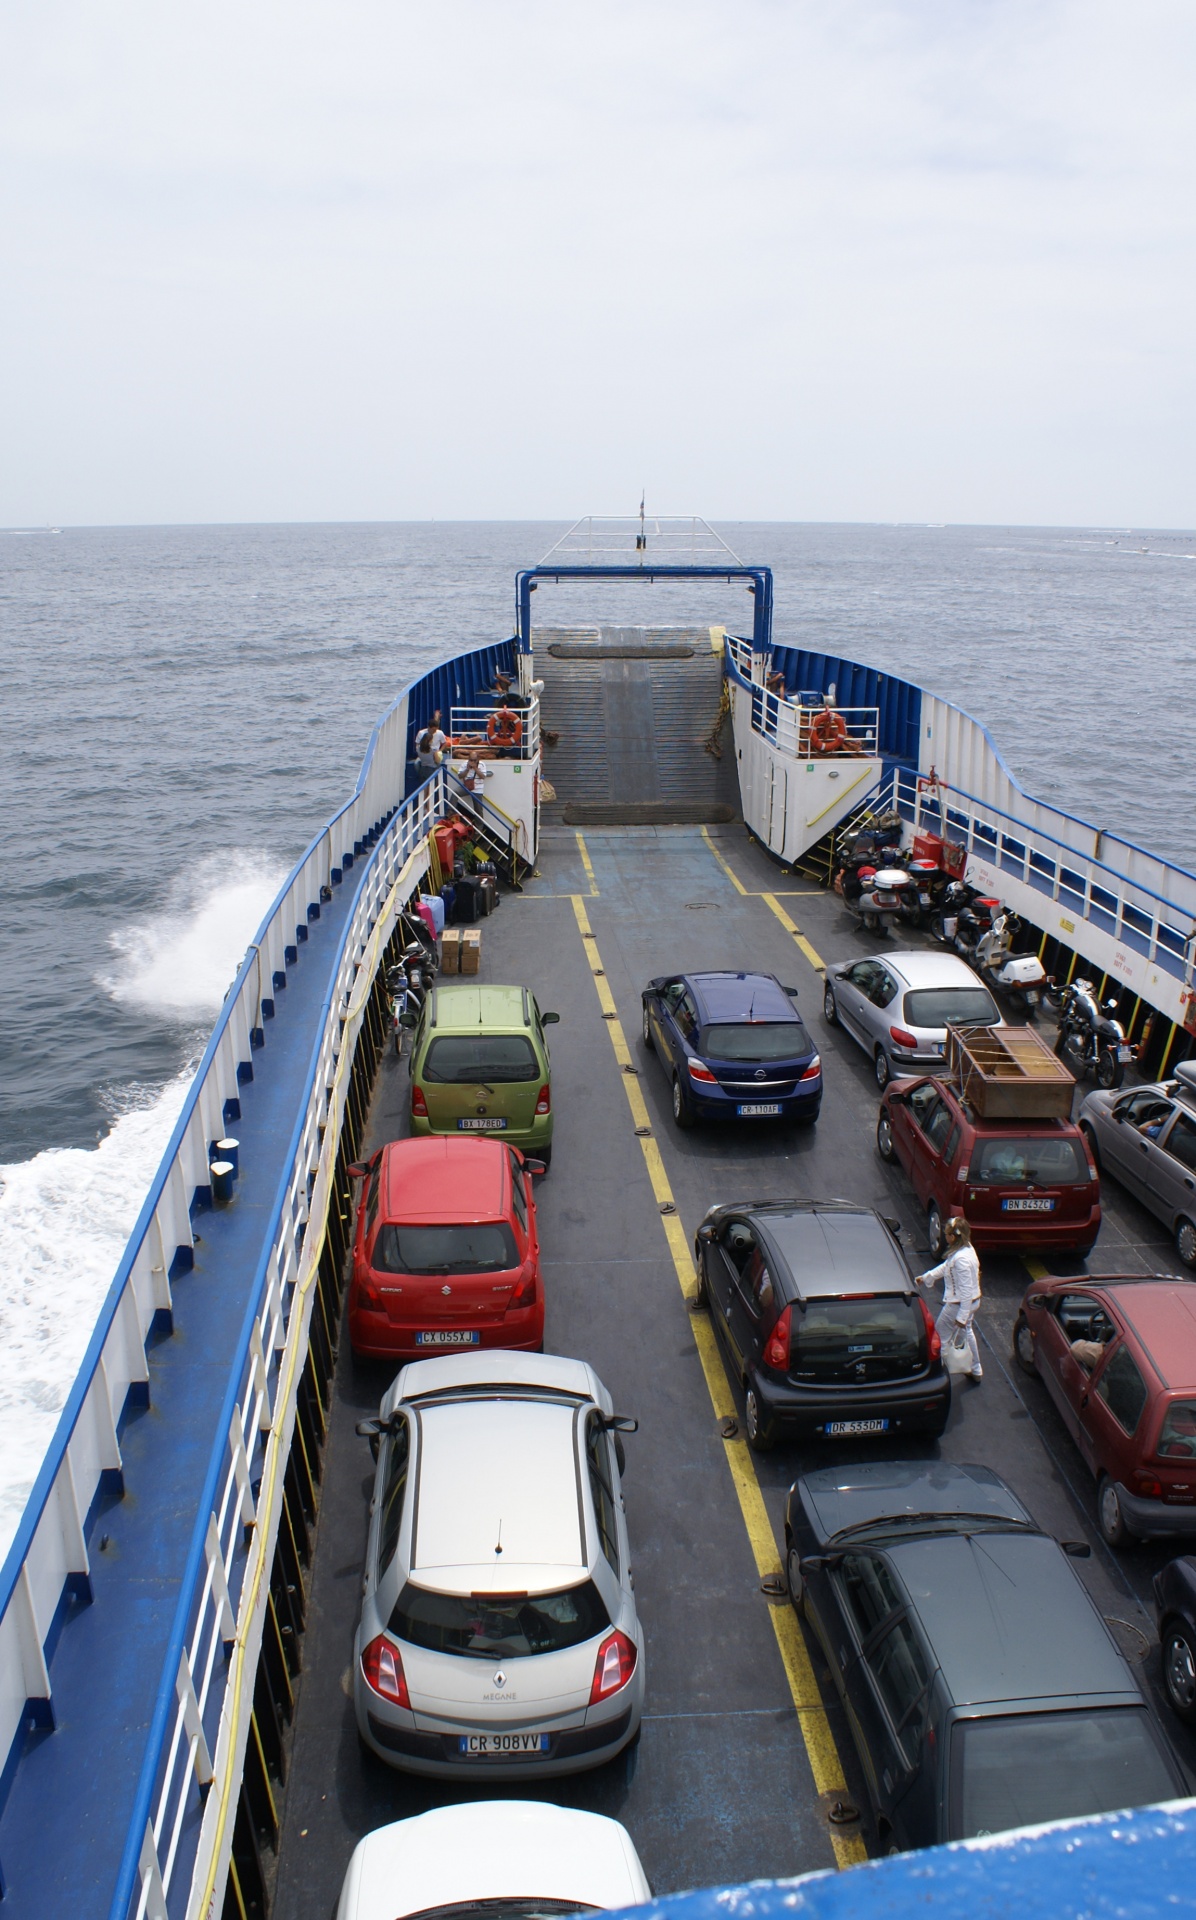 Vehicles On The Bridge Of A Ferry